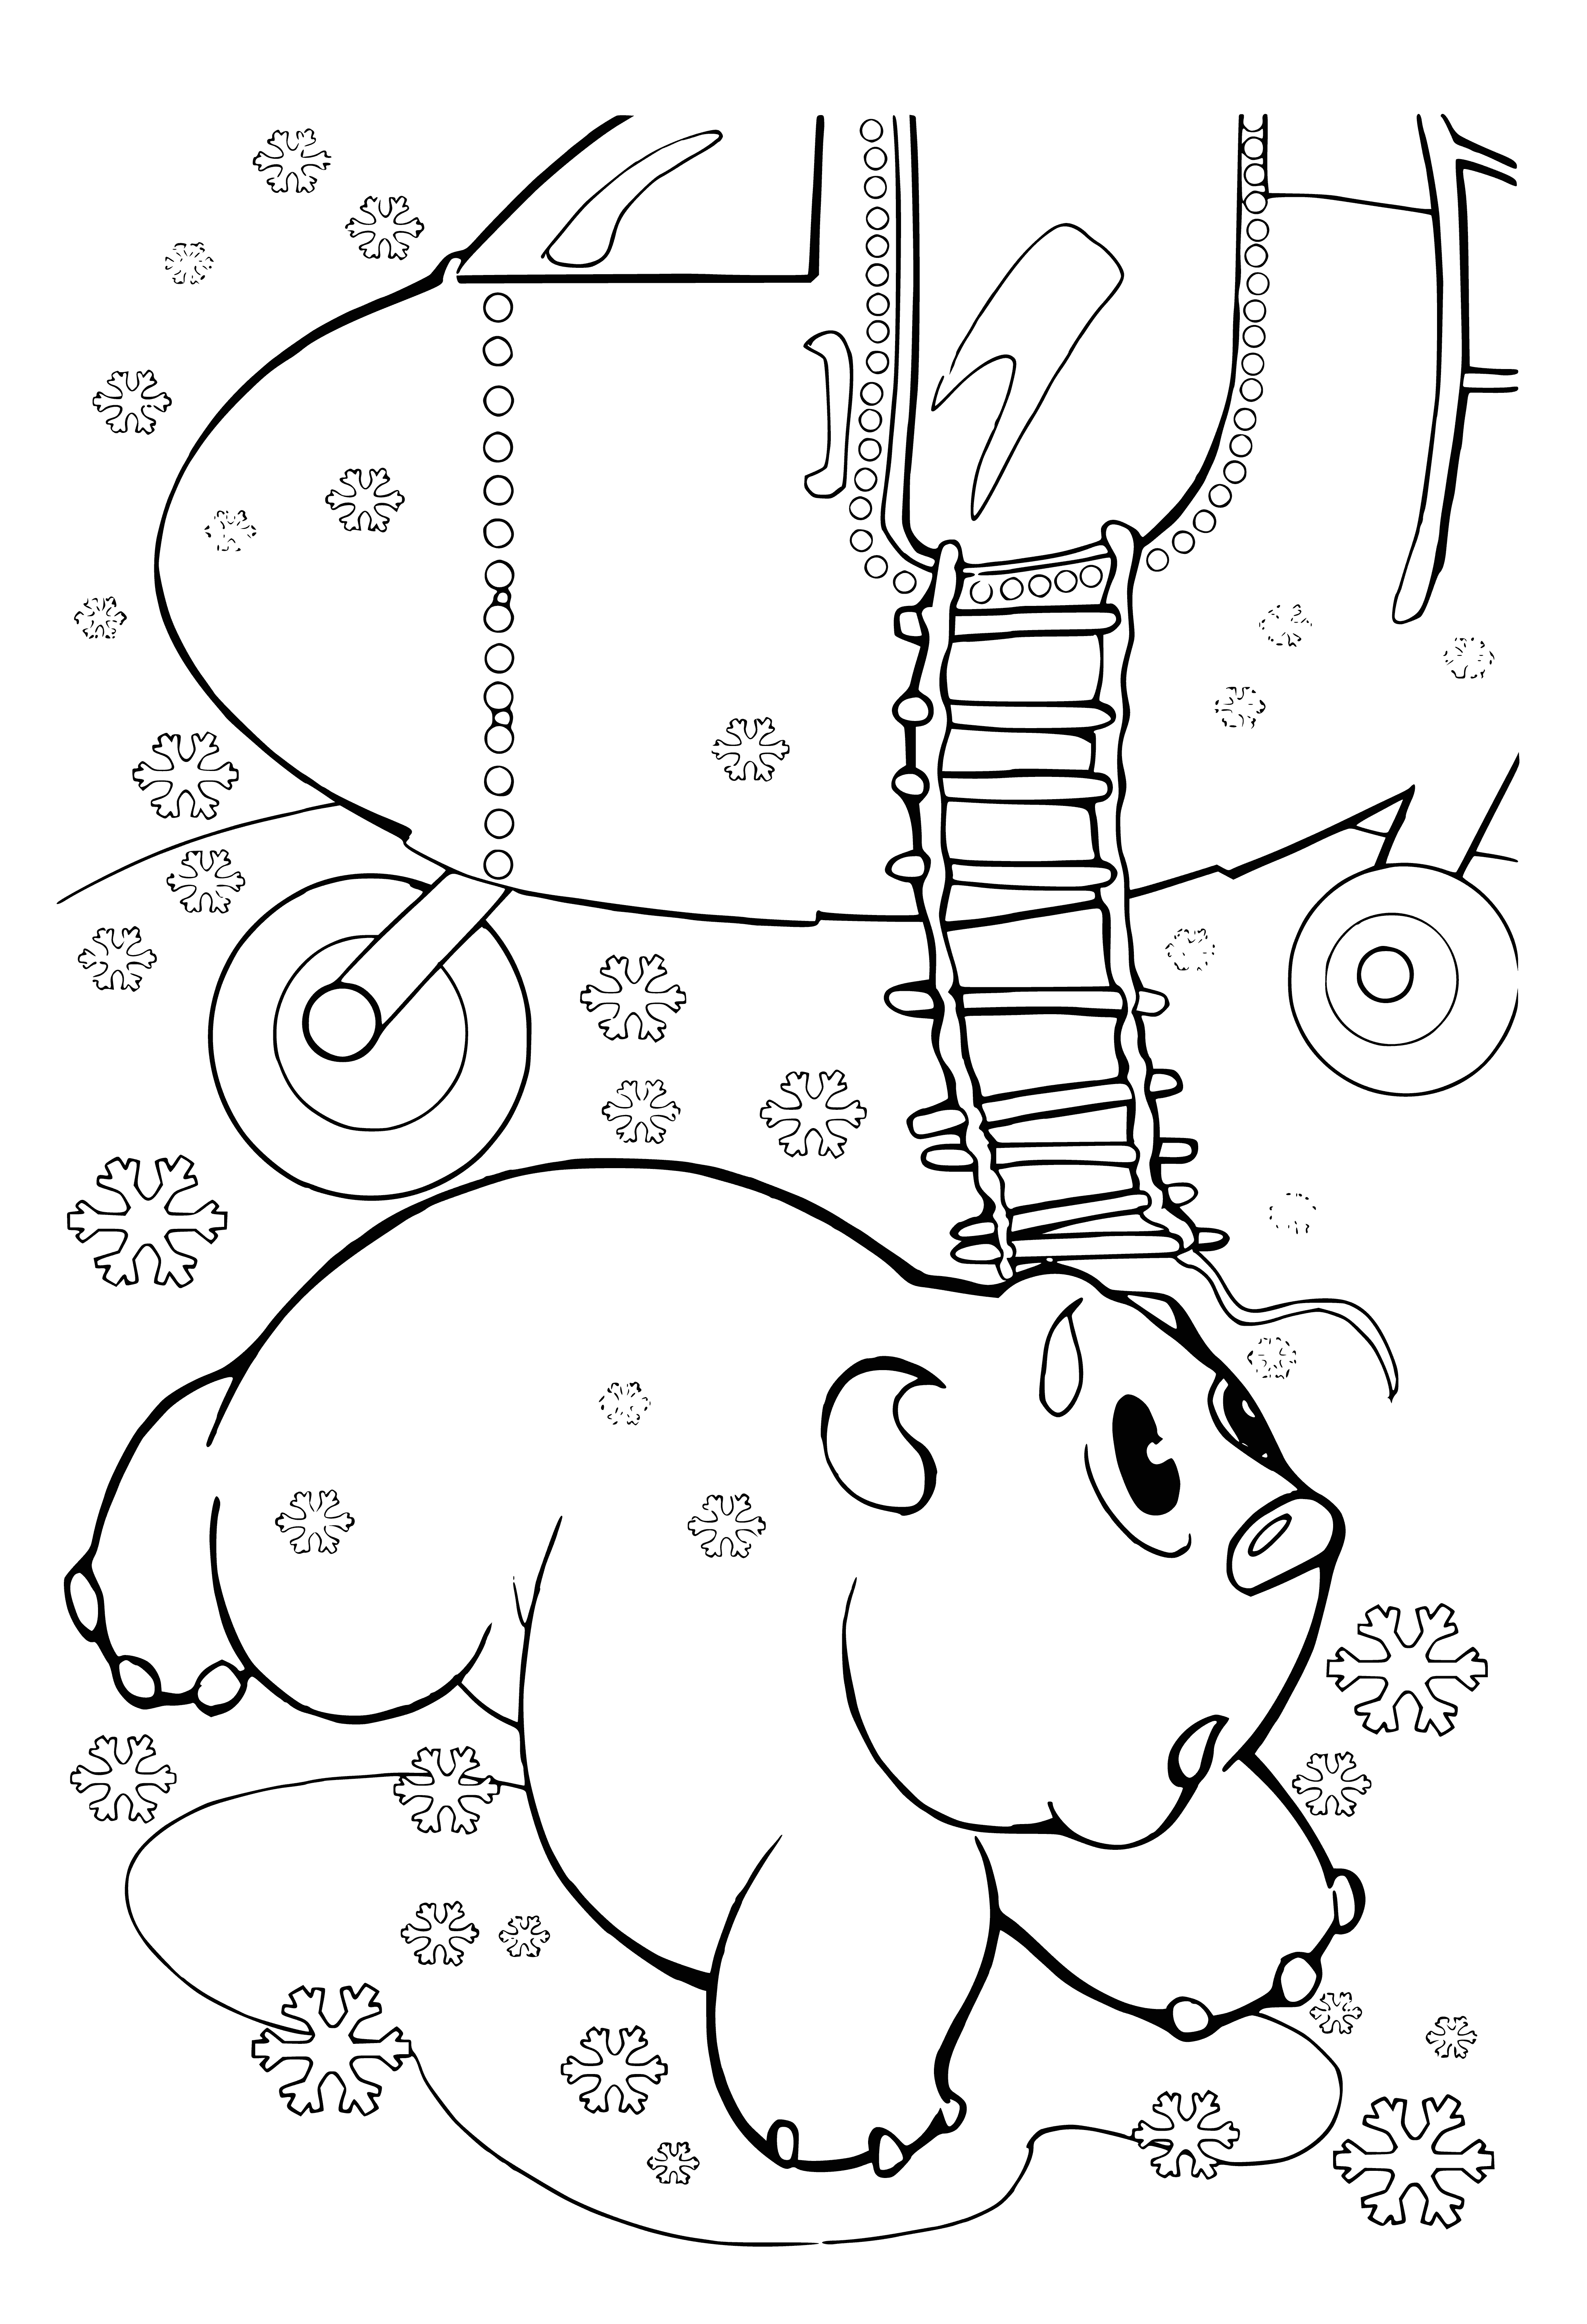 coloring page: Teddy bear in open helicopter door wearing red scarf, white belly, brown fur.